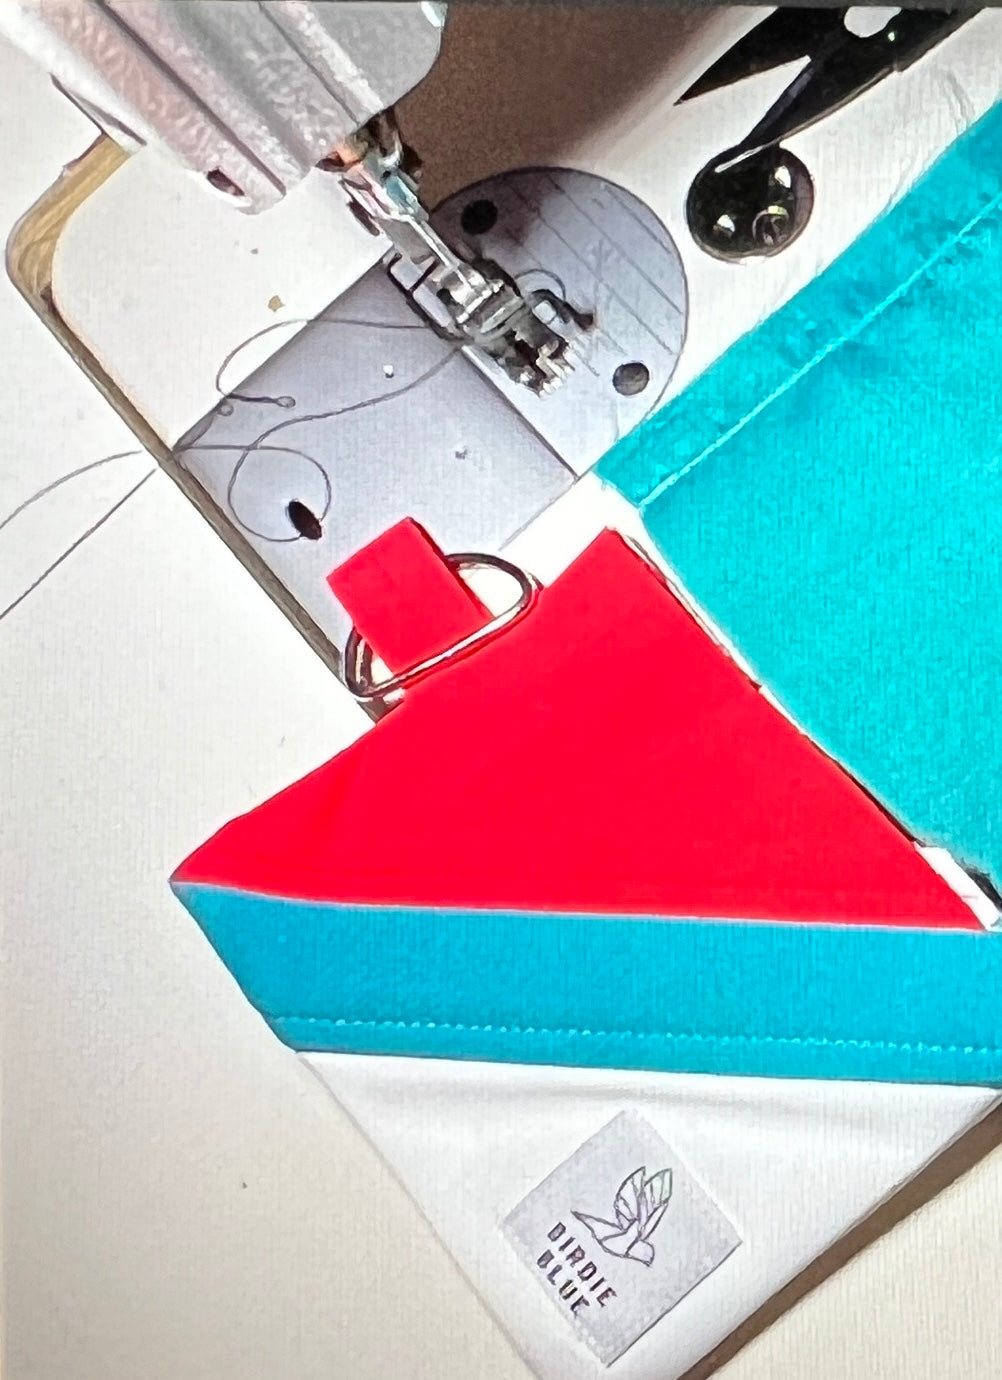 Colorful zipper wallet next to sewing machine made from old ski and snowboard clothing